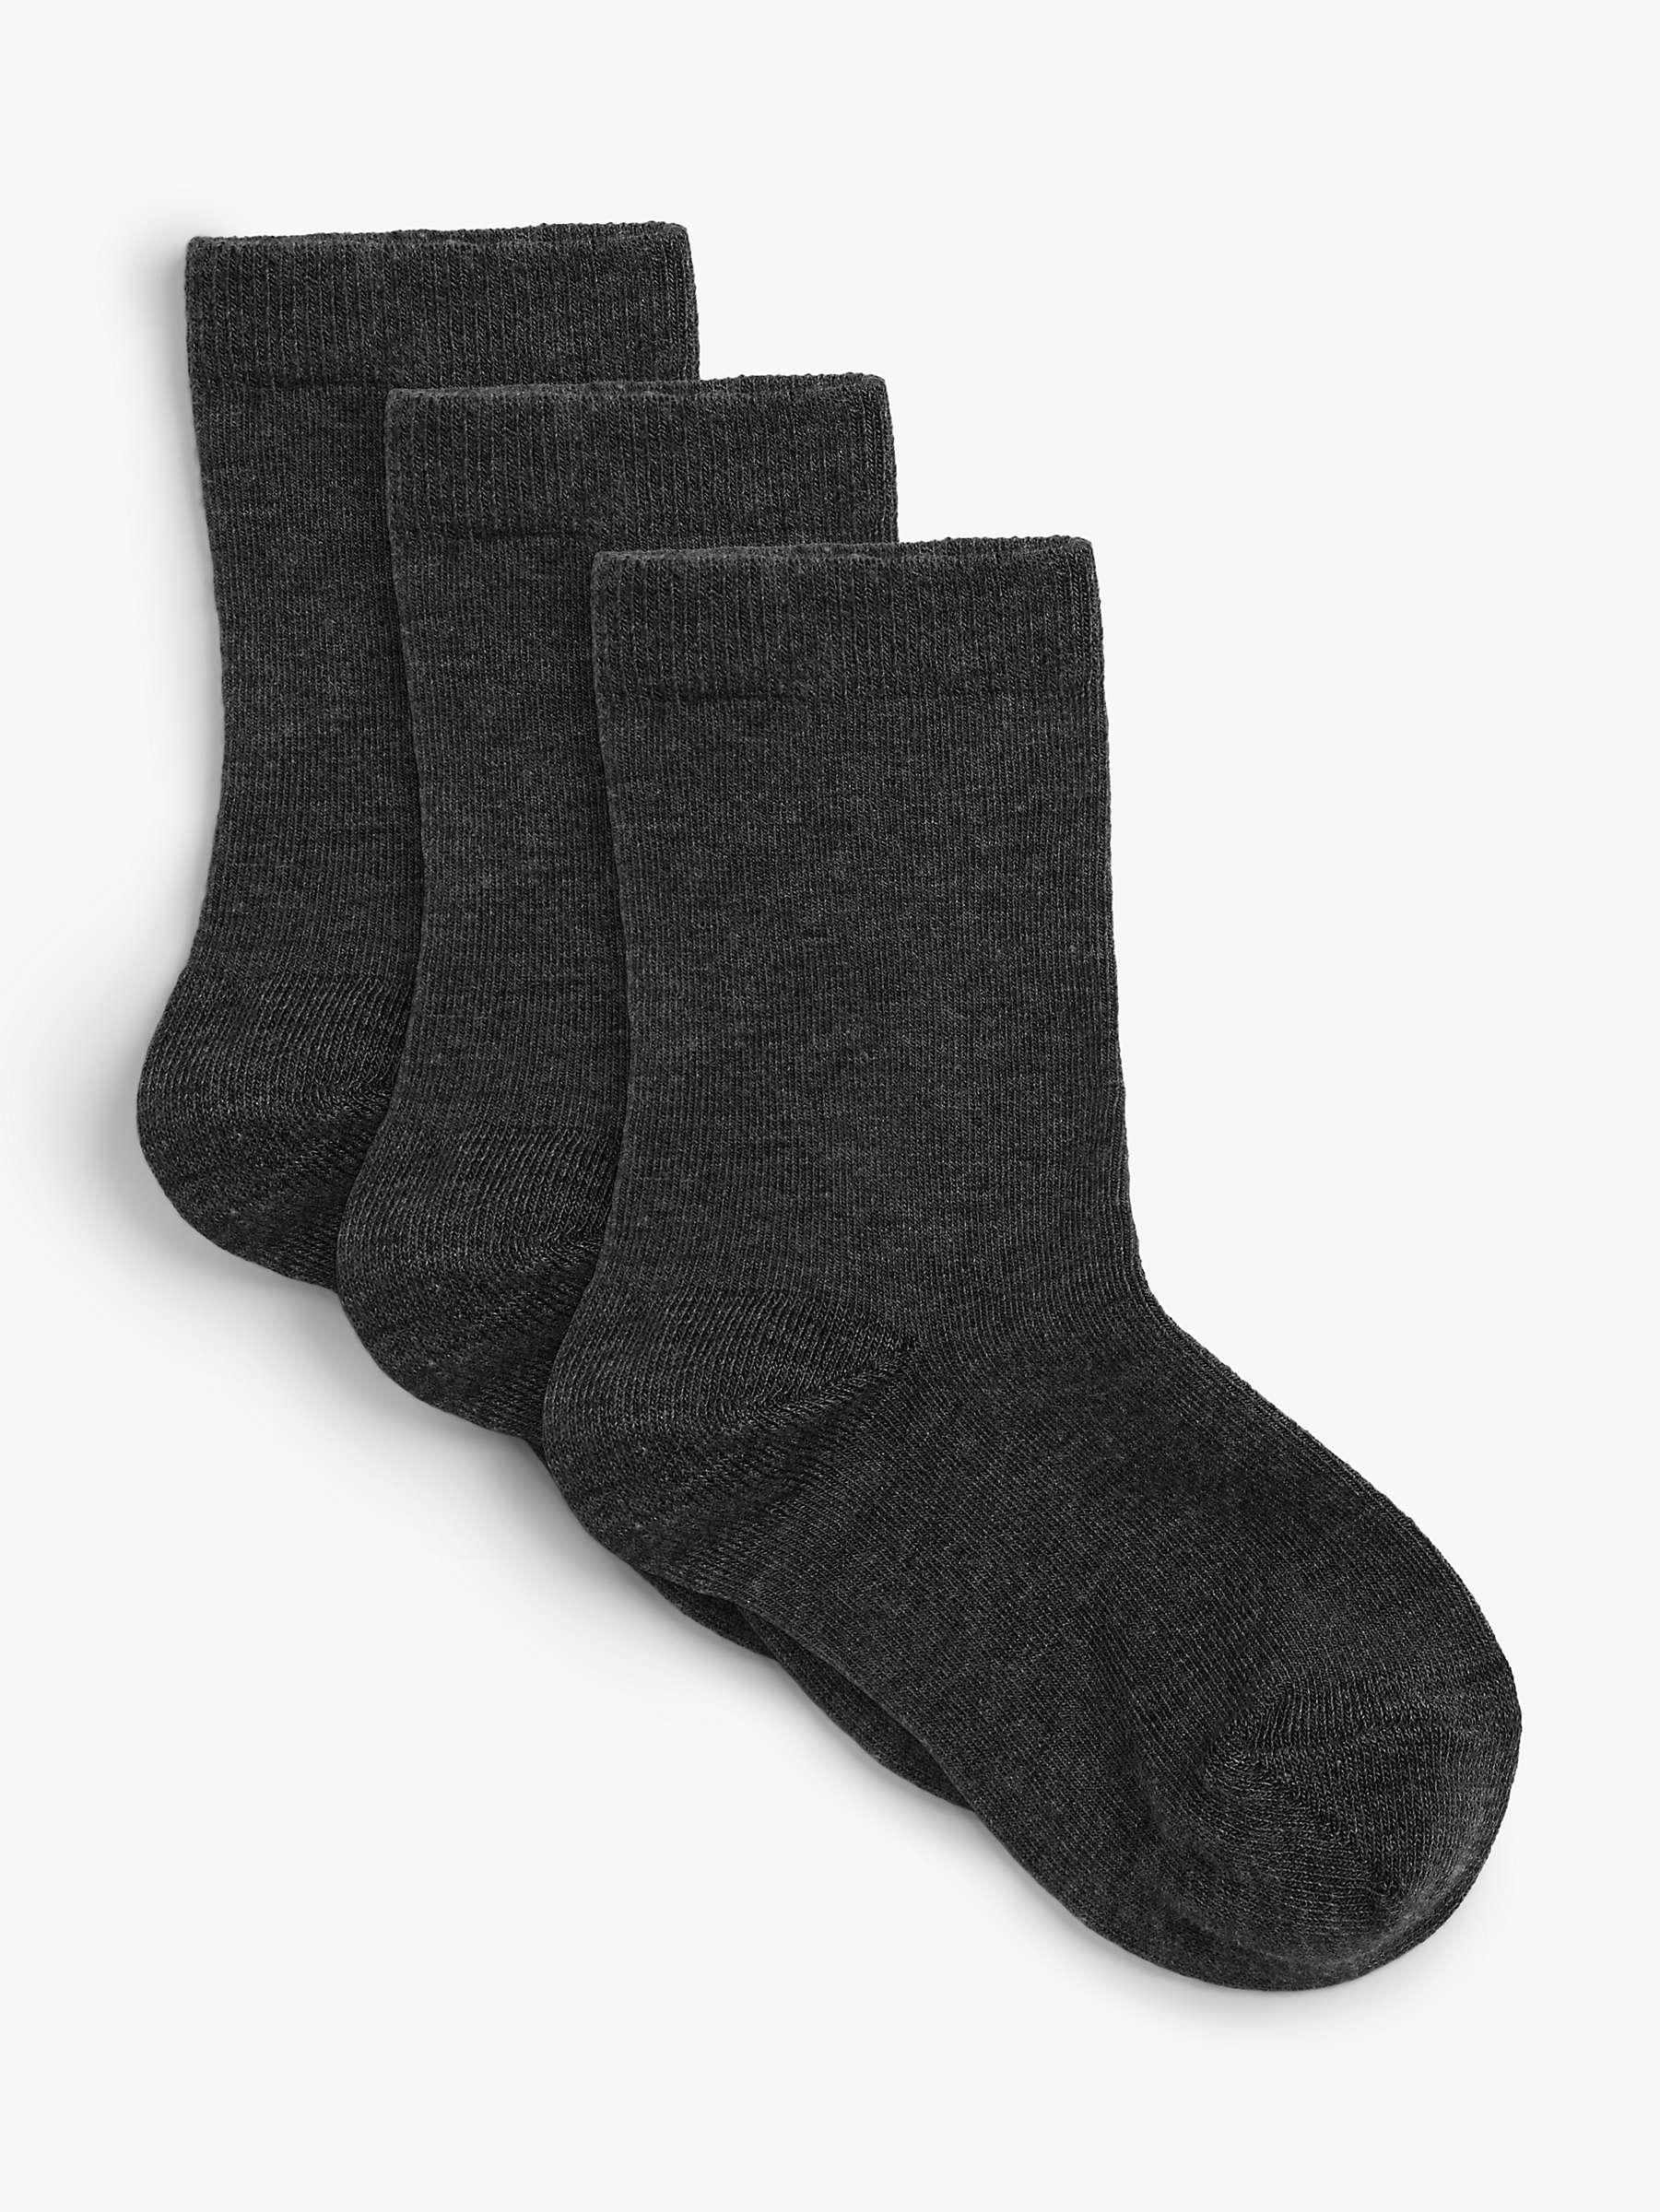 Buy John Lewis Kids' Supersoft Thermal Ankle Socks, Pack of 3, Charcoal Online at johnlewis.com